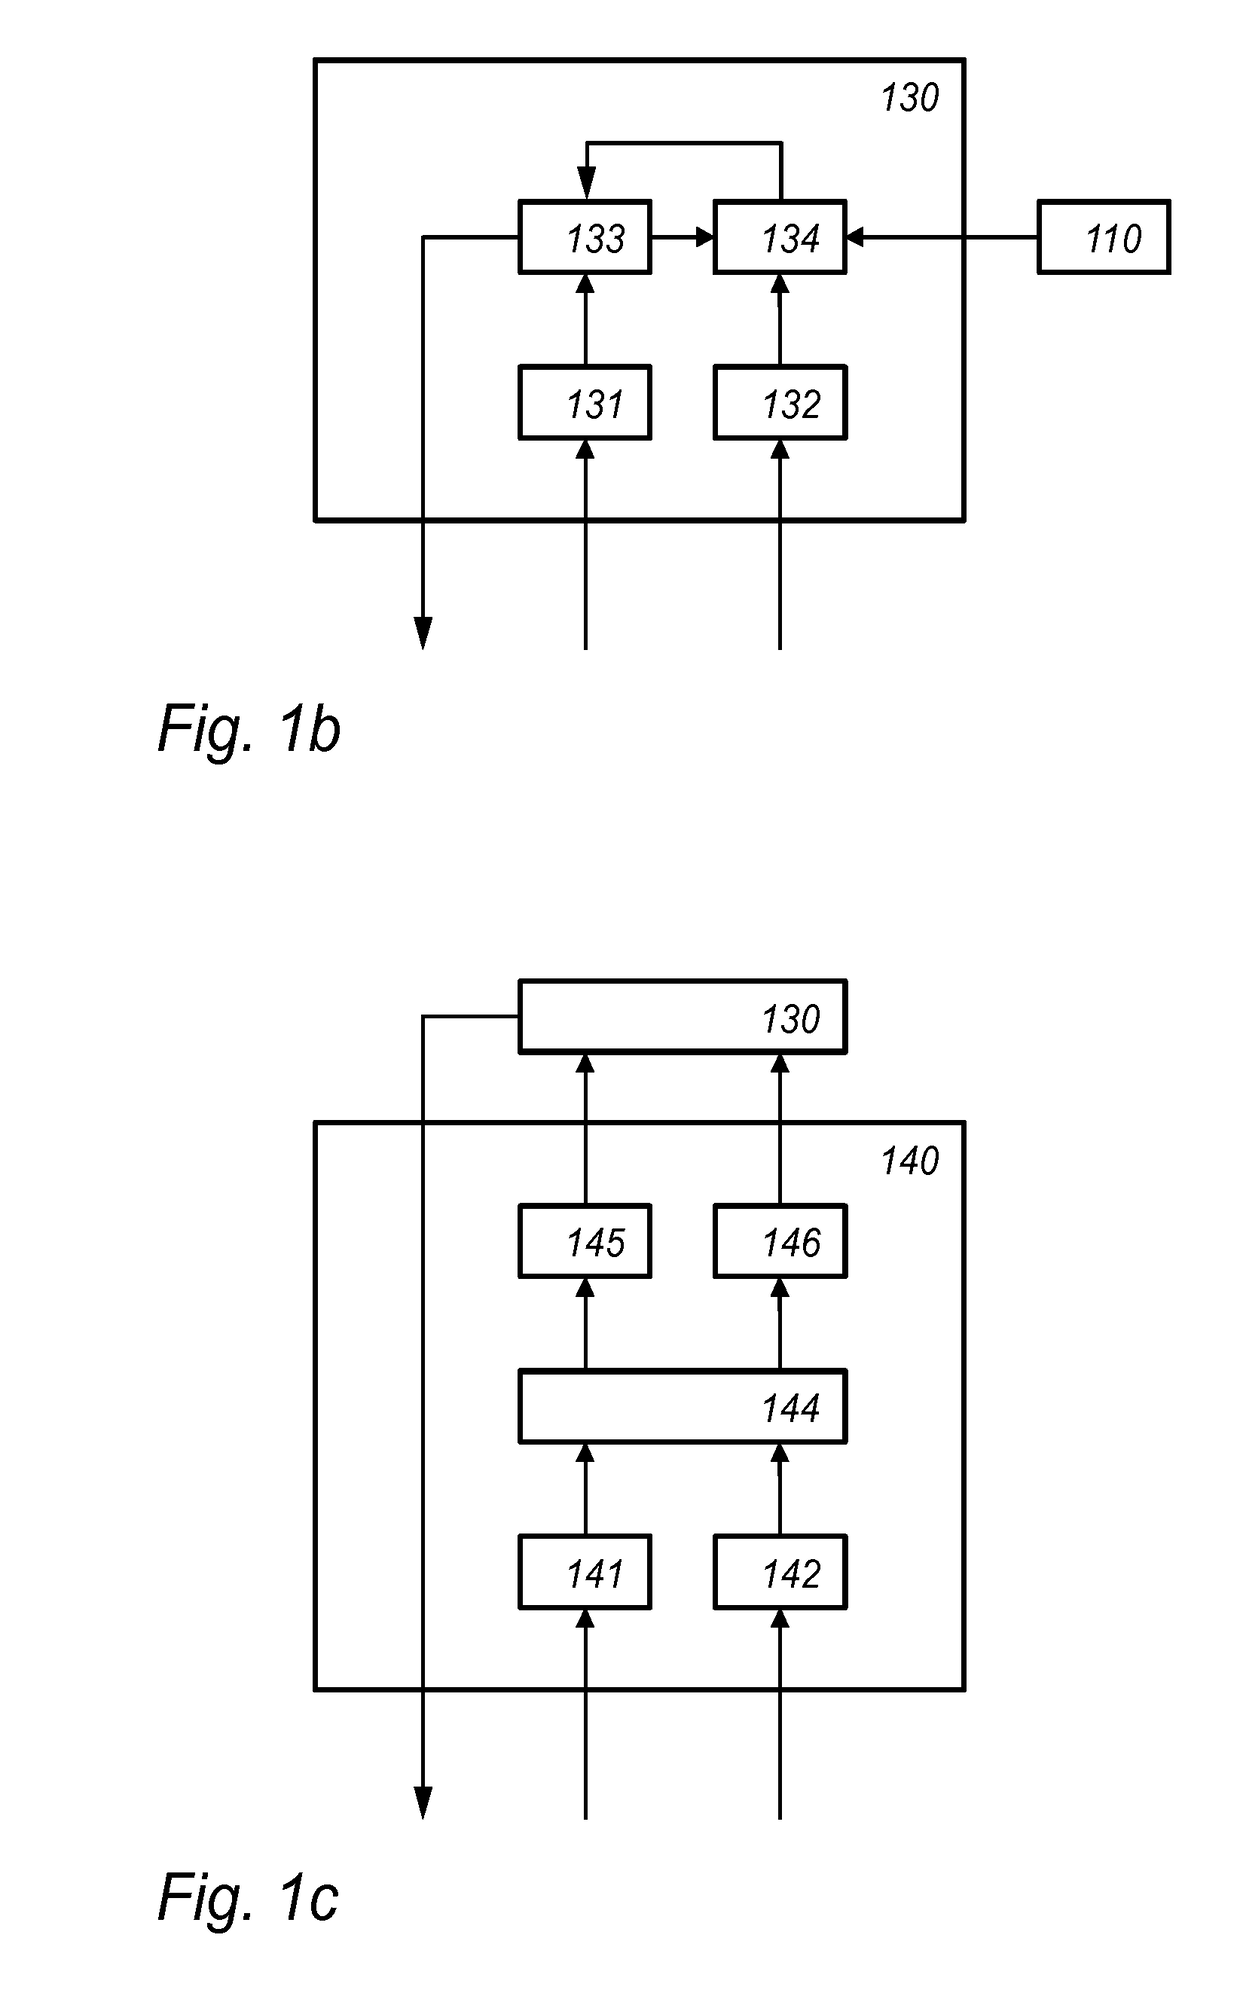 Electronic calculating device for performing obfuscated arithmetic